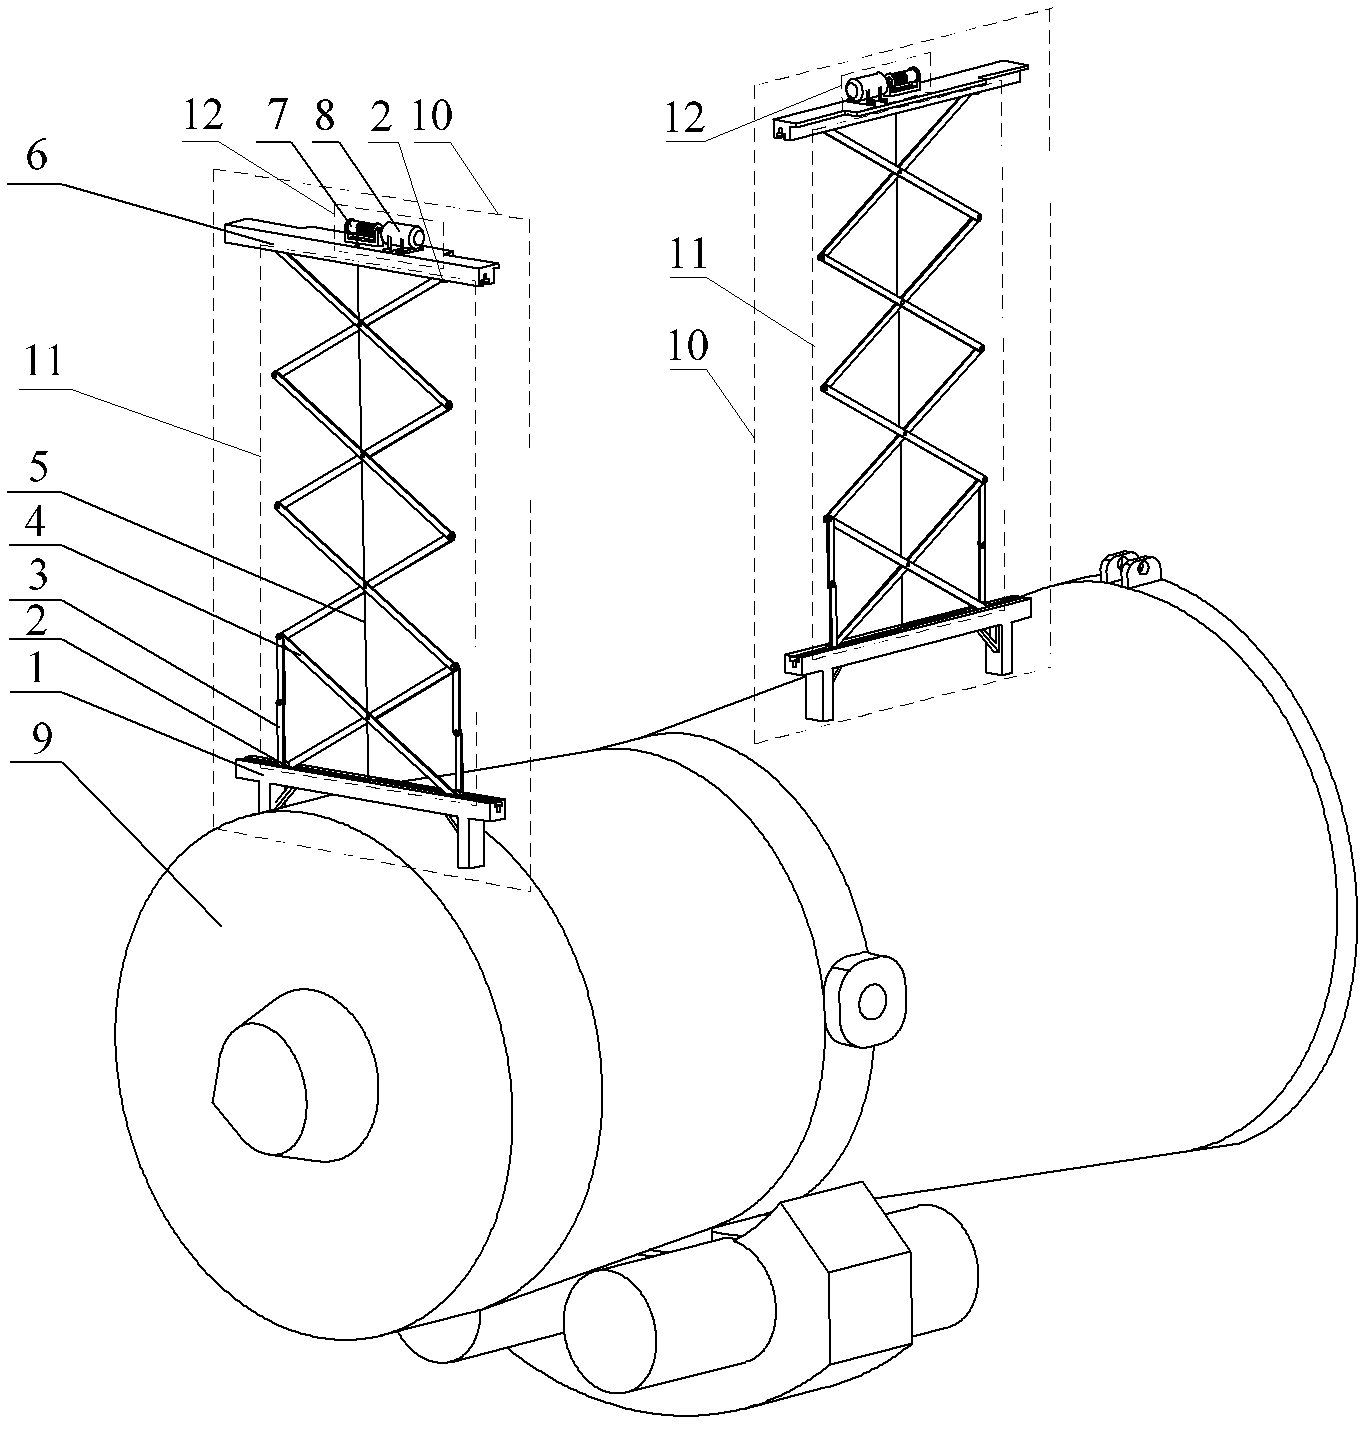 Lifting device for mounting and maintaining aero-engine